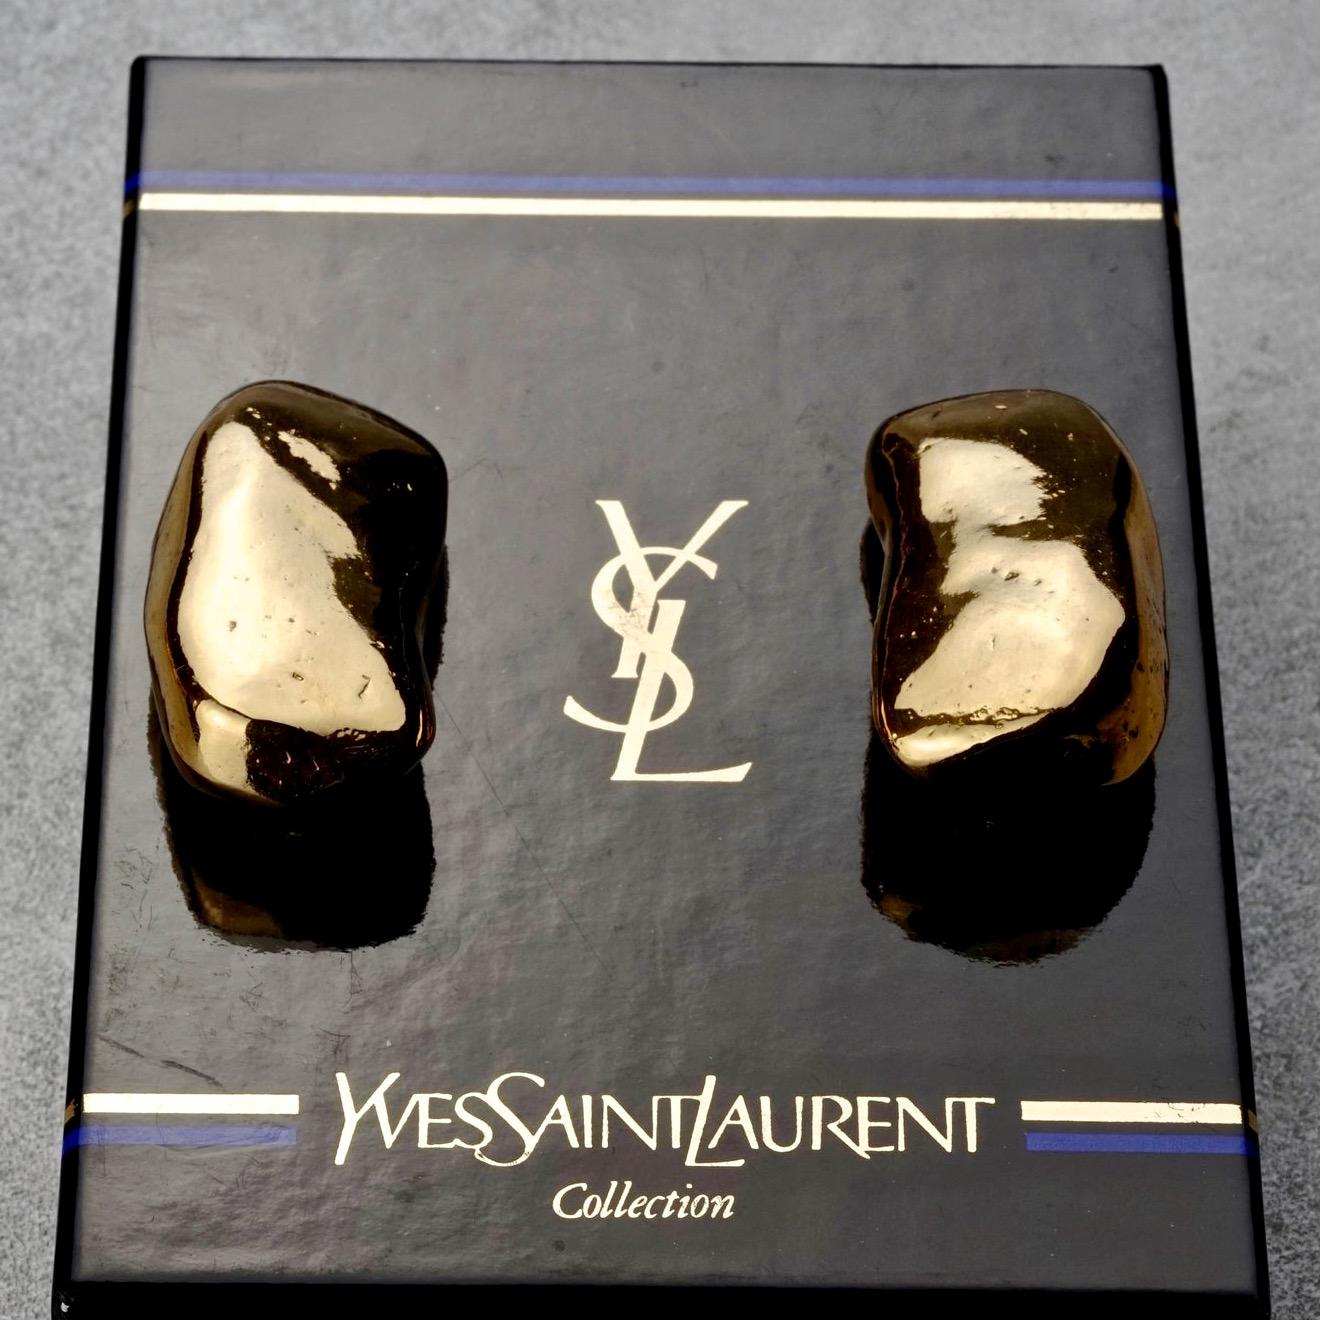 Vintage YVES SAINT LAURENT Ysl Nugget Pillow Chunky Earrings In Excellent Condition For Sale In Kingersheim, Alsace